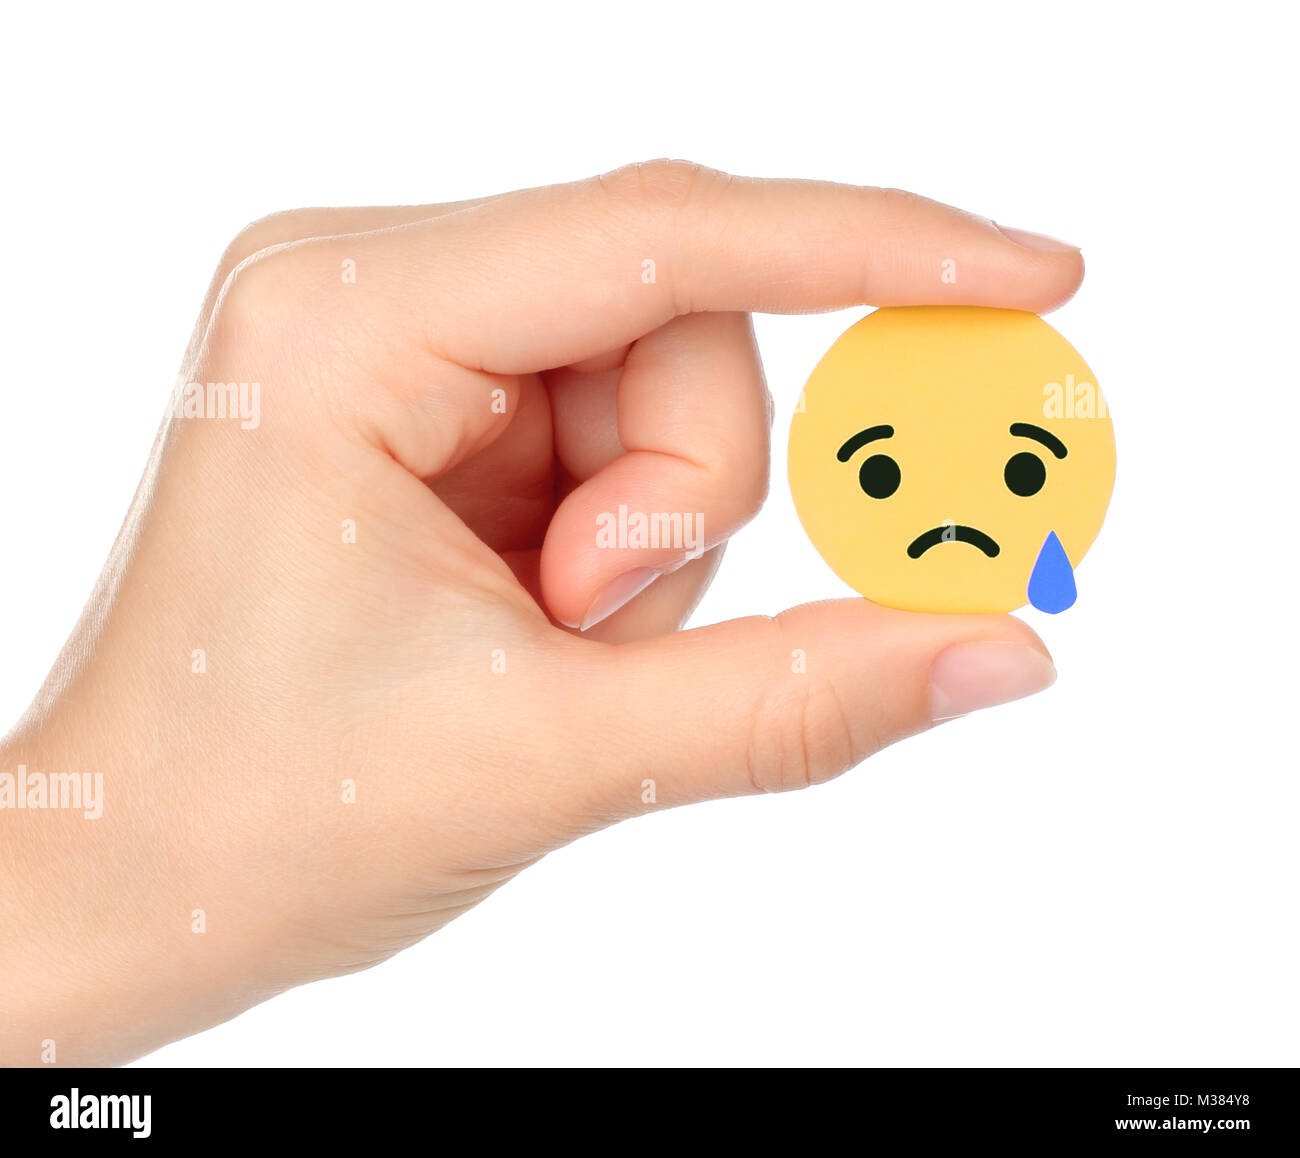 Kiev, Ukraine - September 04, 2017: Hand holds Facebook Sad Empathetic Emoji Reaction, printed on paper. Facebook is a well-known social networking se Stock Photo